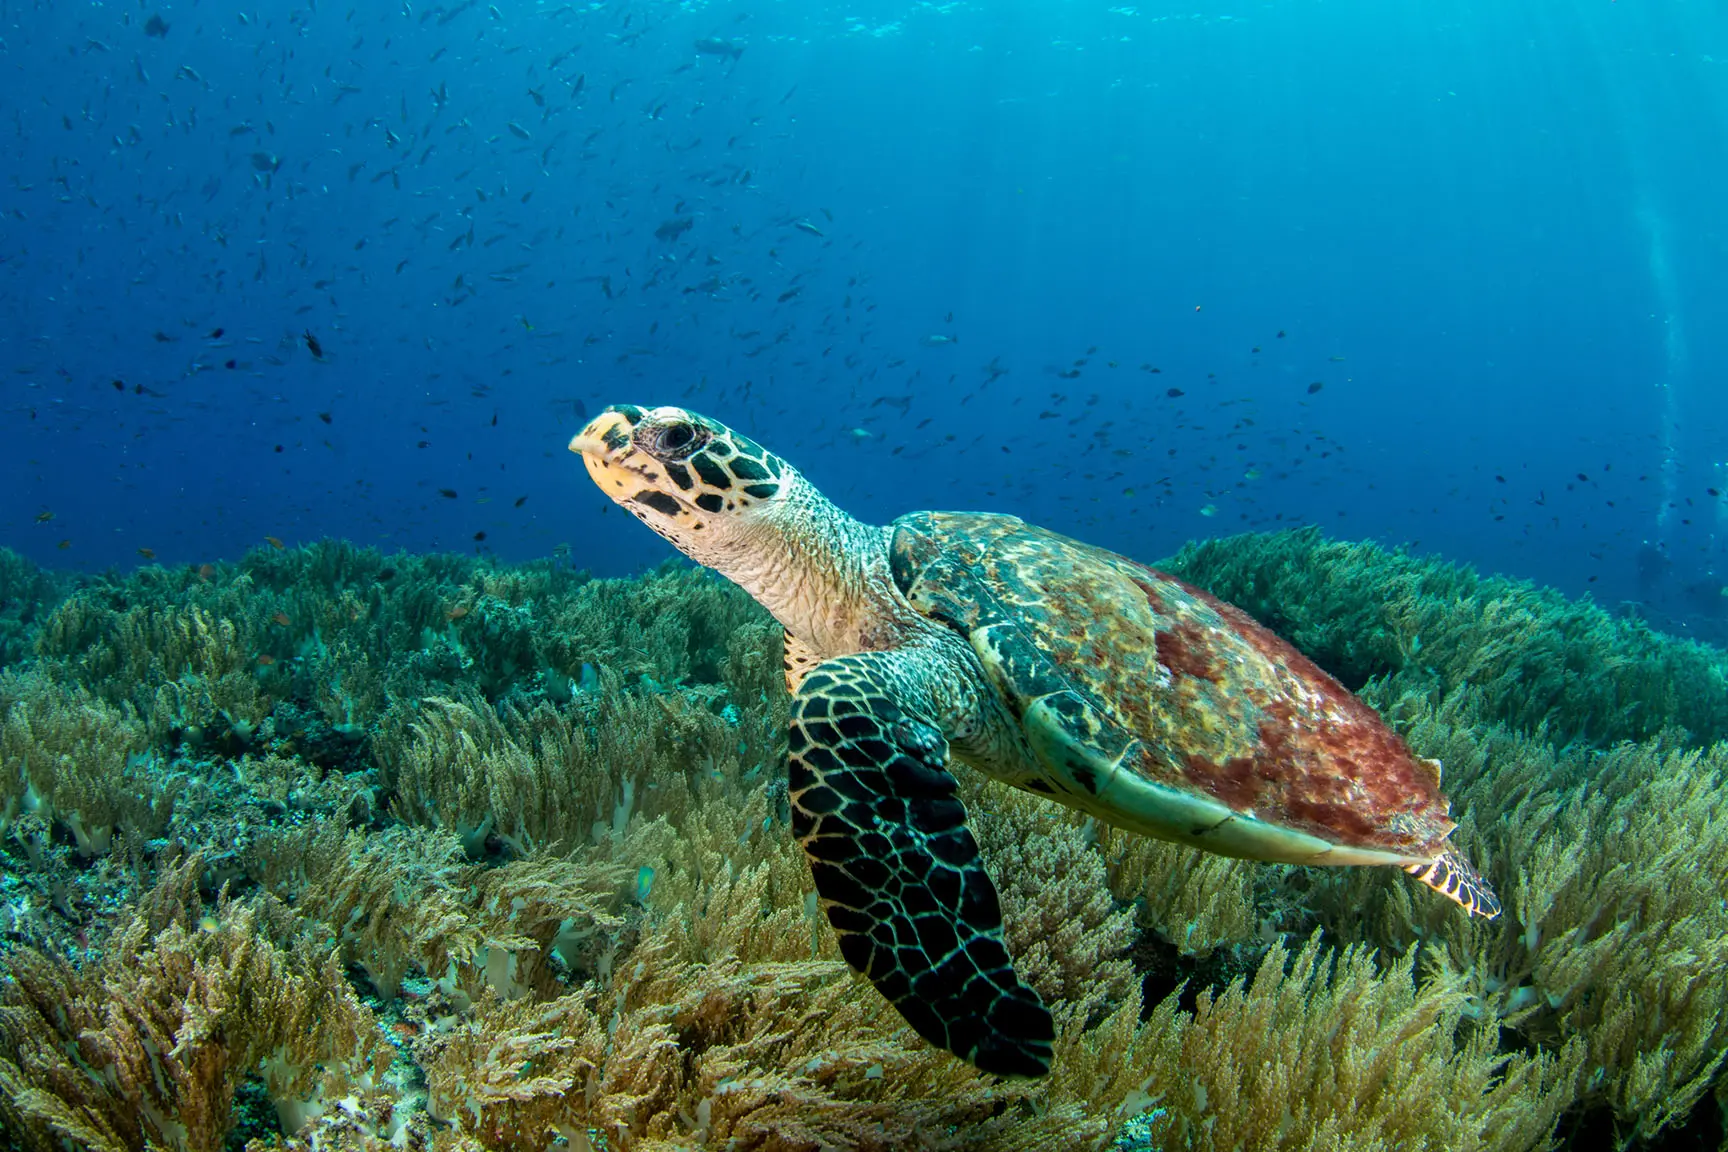 A Critically Endangered Hawksbill Sea Turtle (Eretmochelys imbricata) rests on an algae bed in the Coral Sea off Papua Burat, Indonesia.